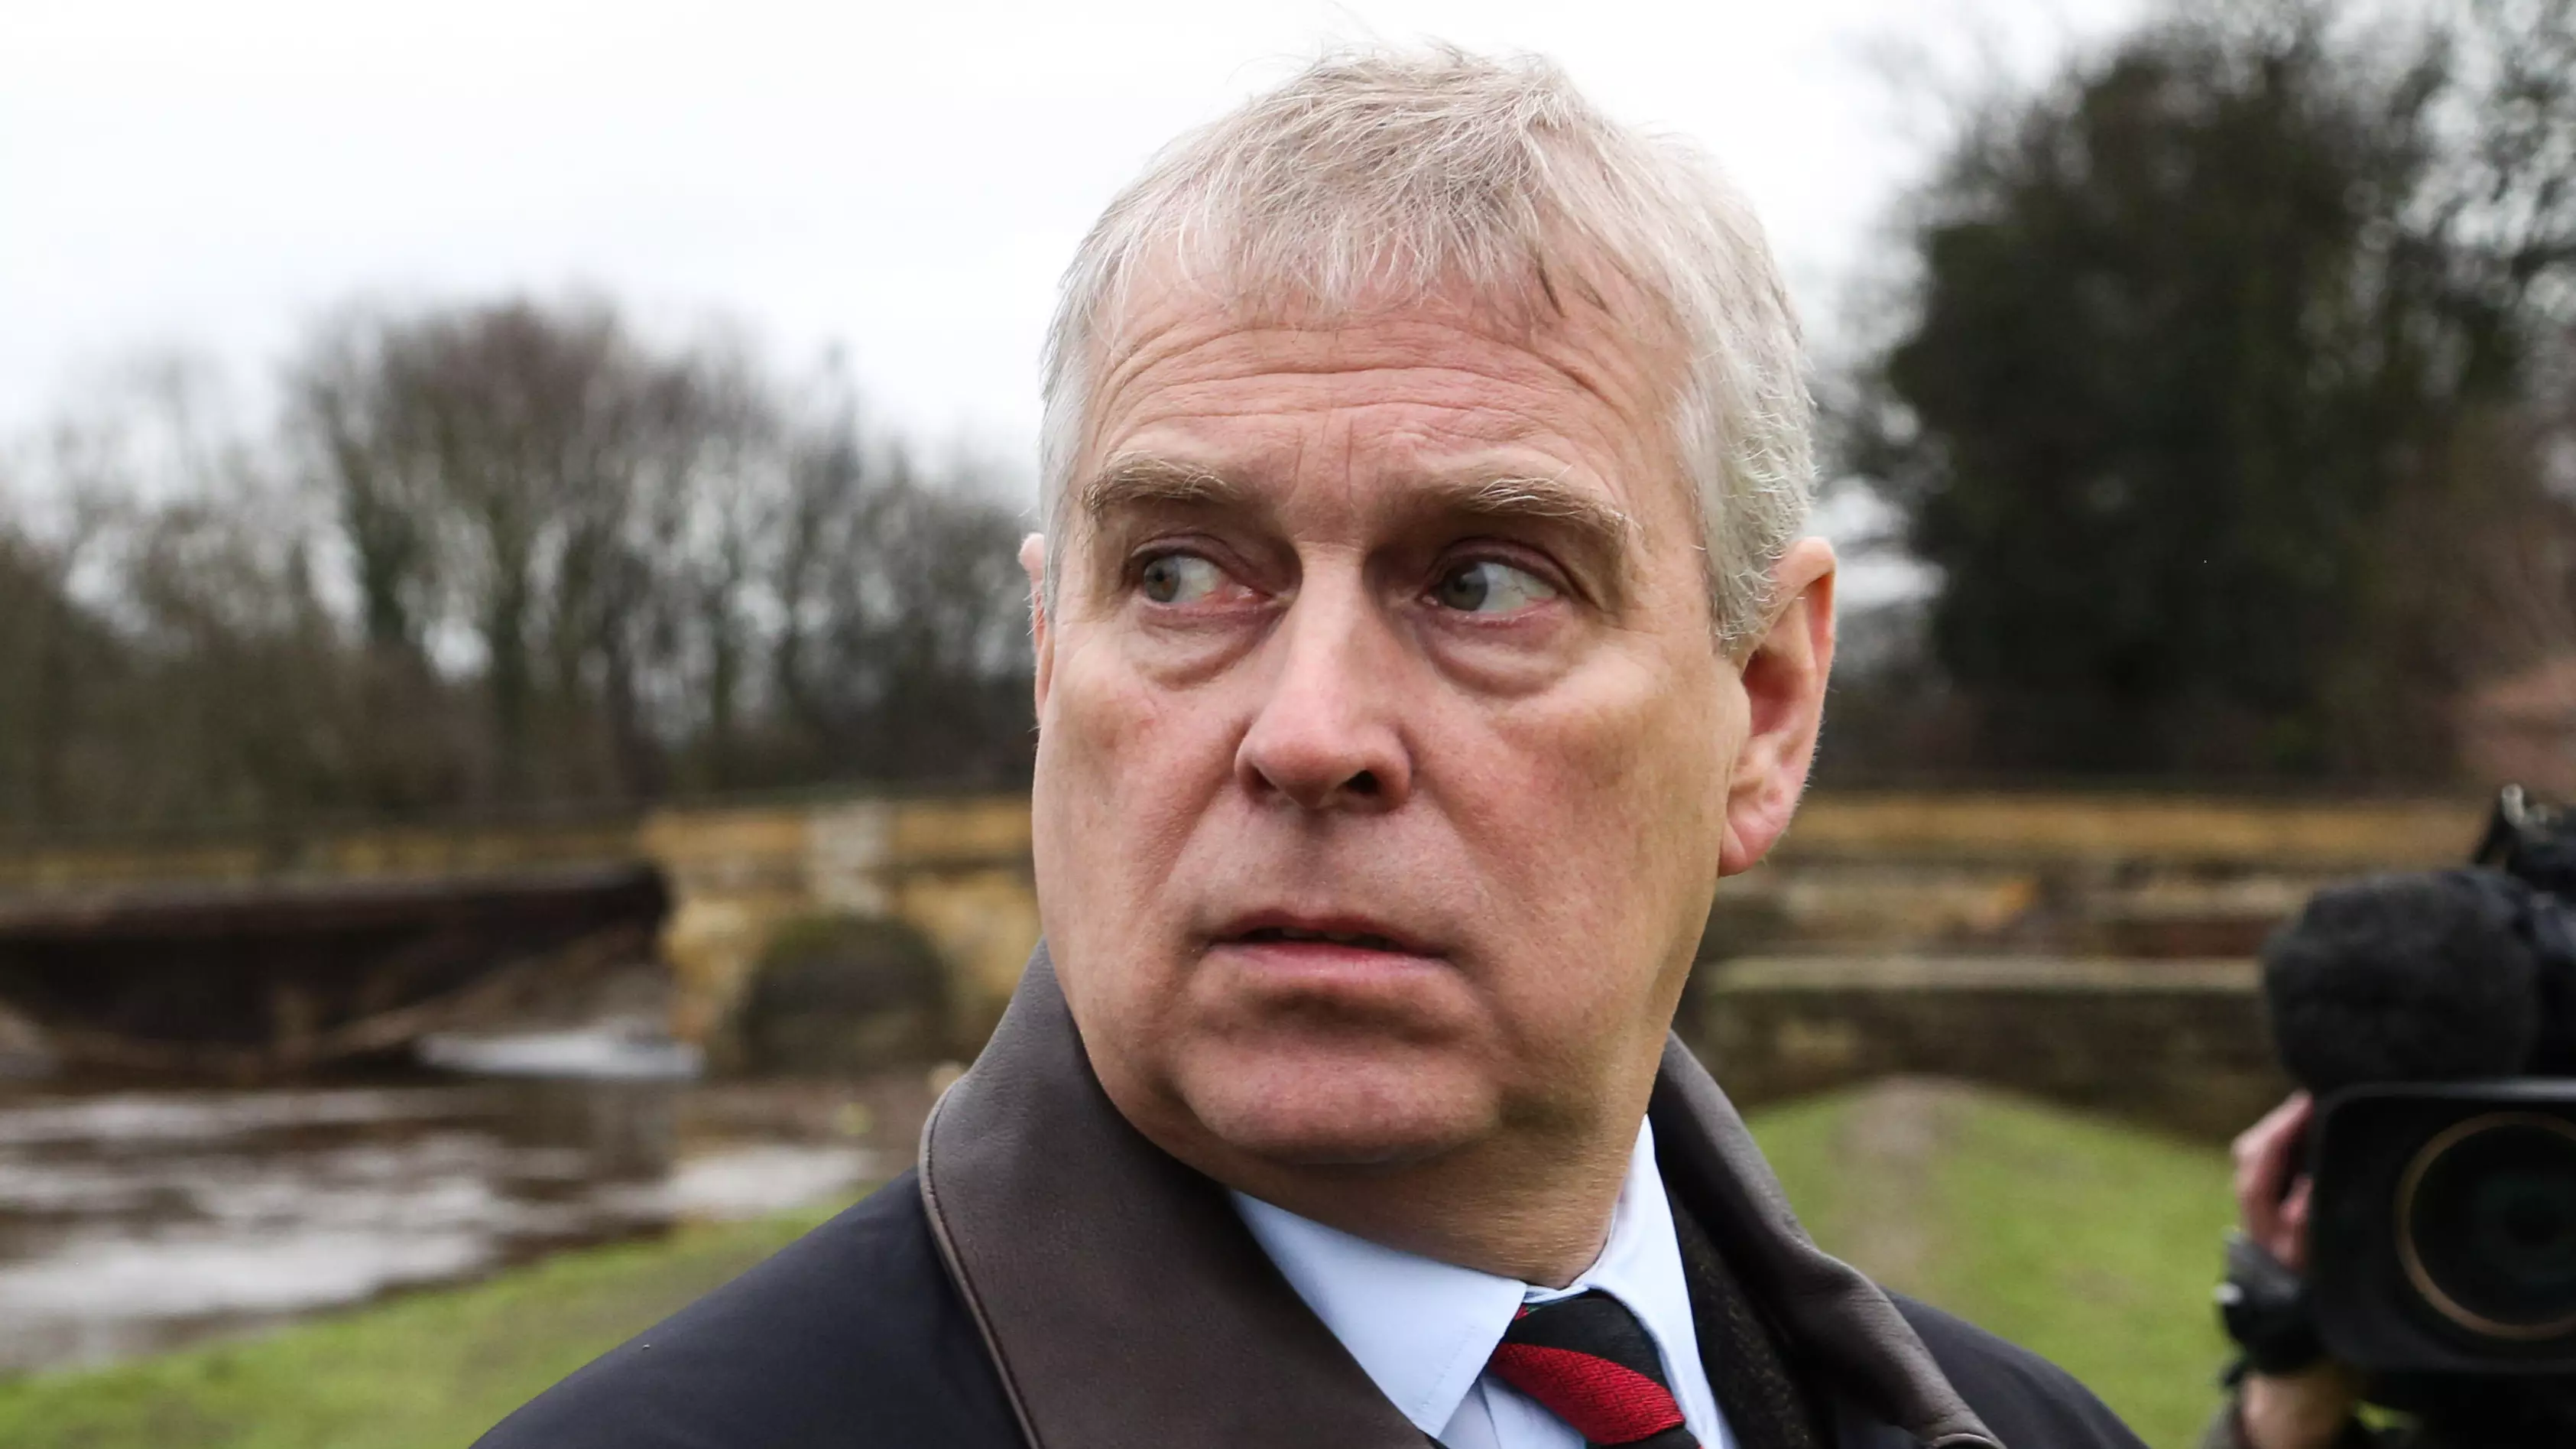 Scotland Yard Have Completed Their Investigation Into Prince Andrew